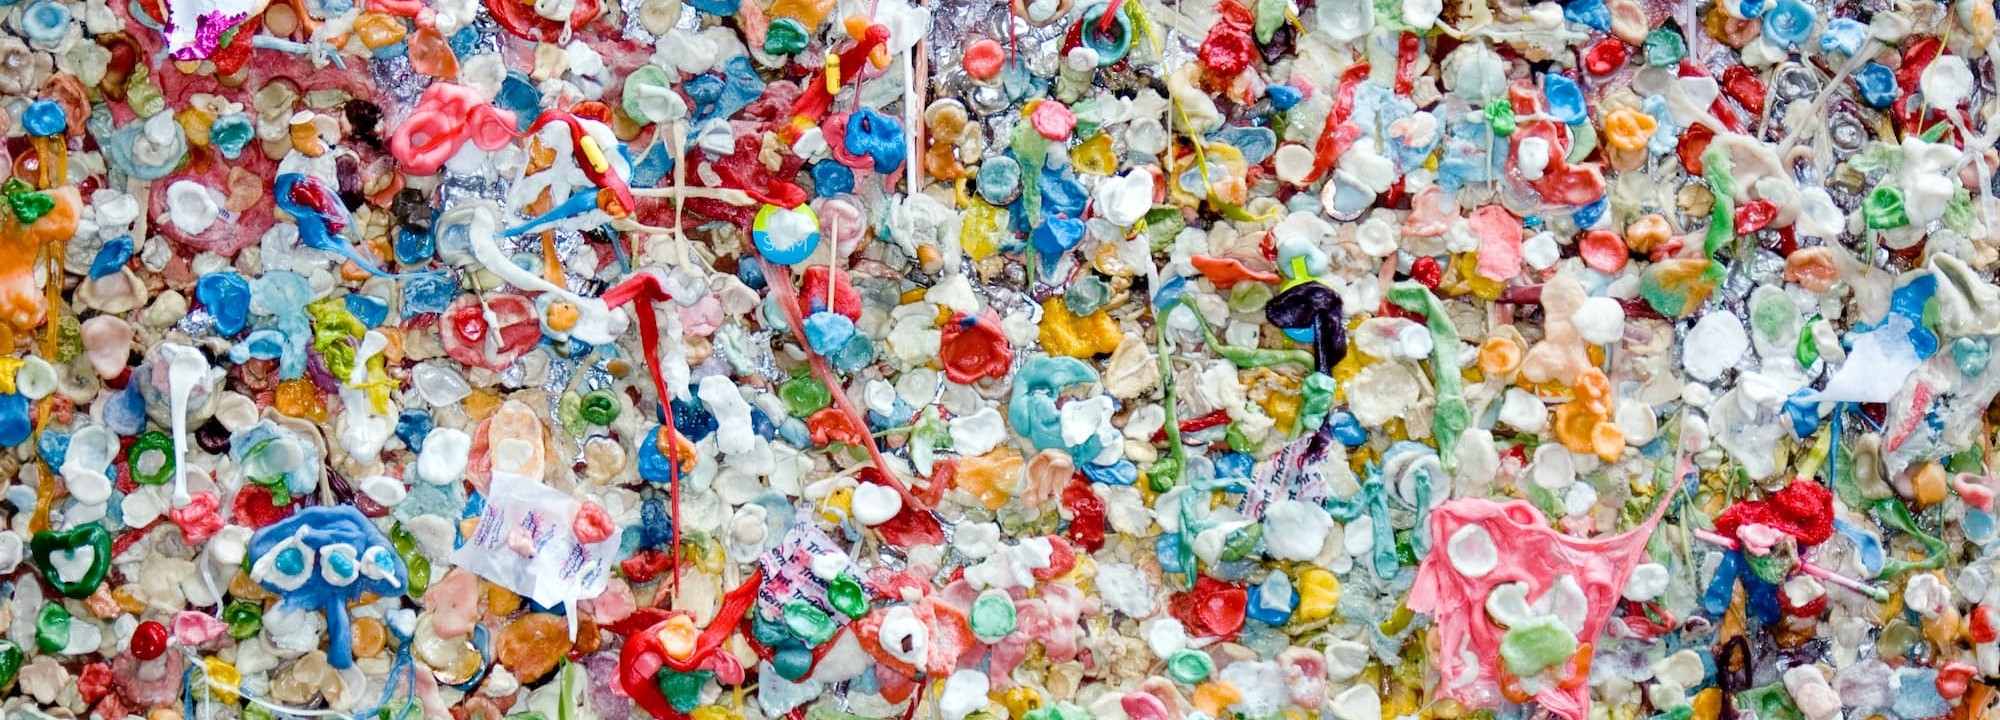 crushed plastic bottles and packaging.